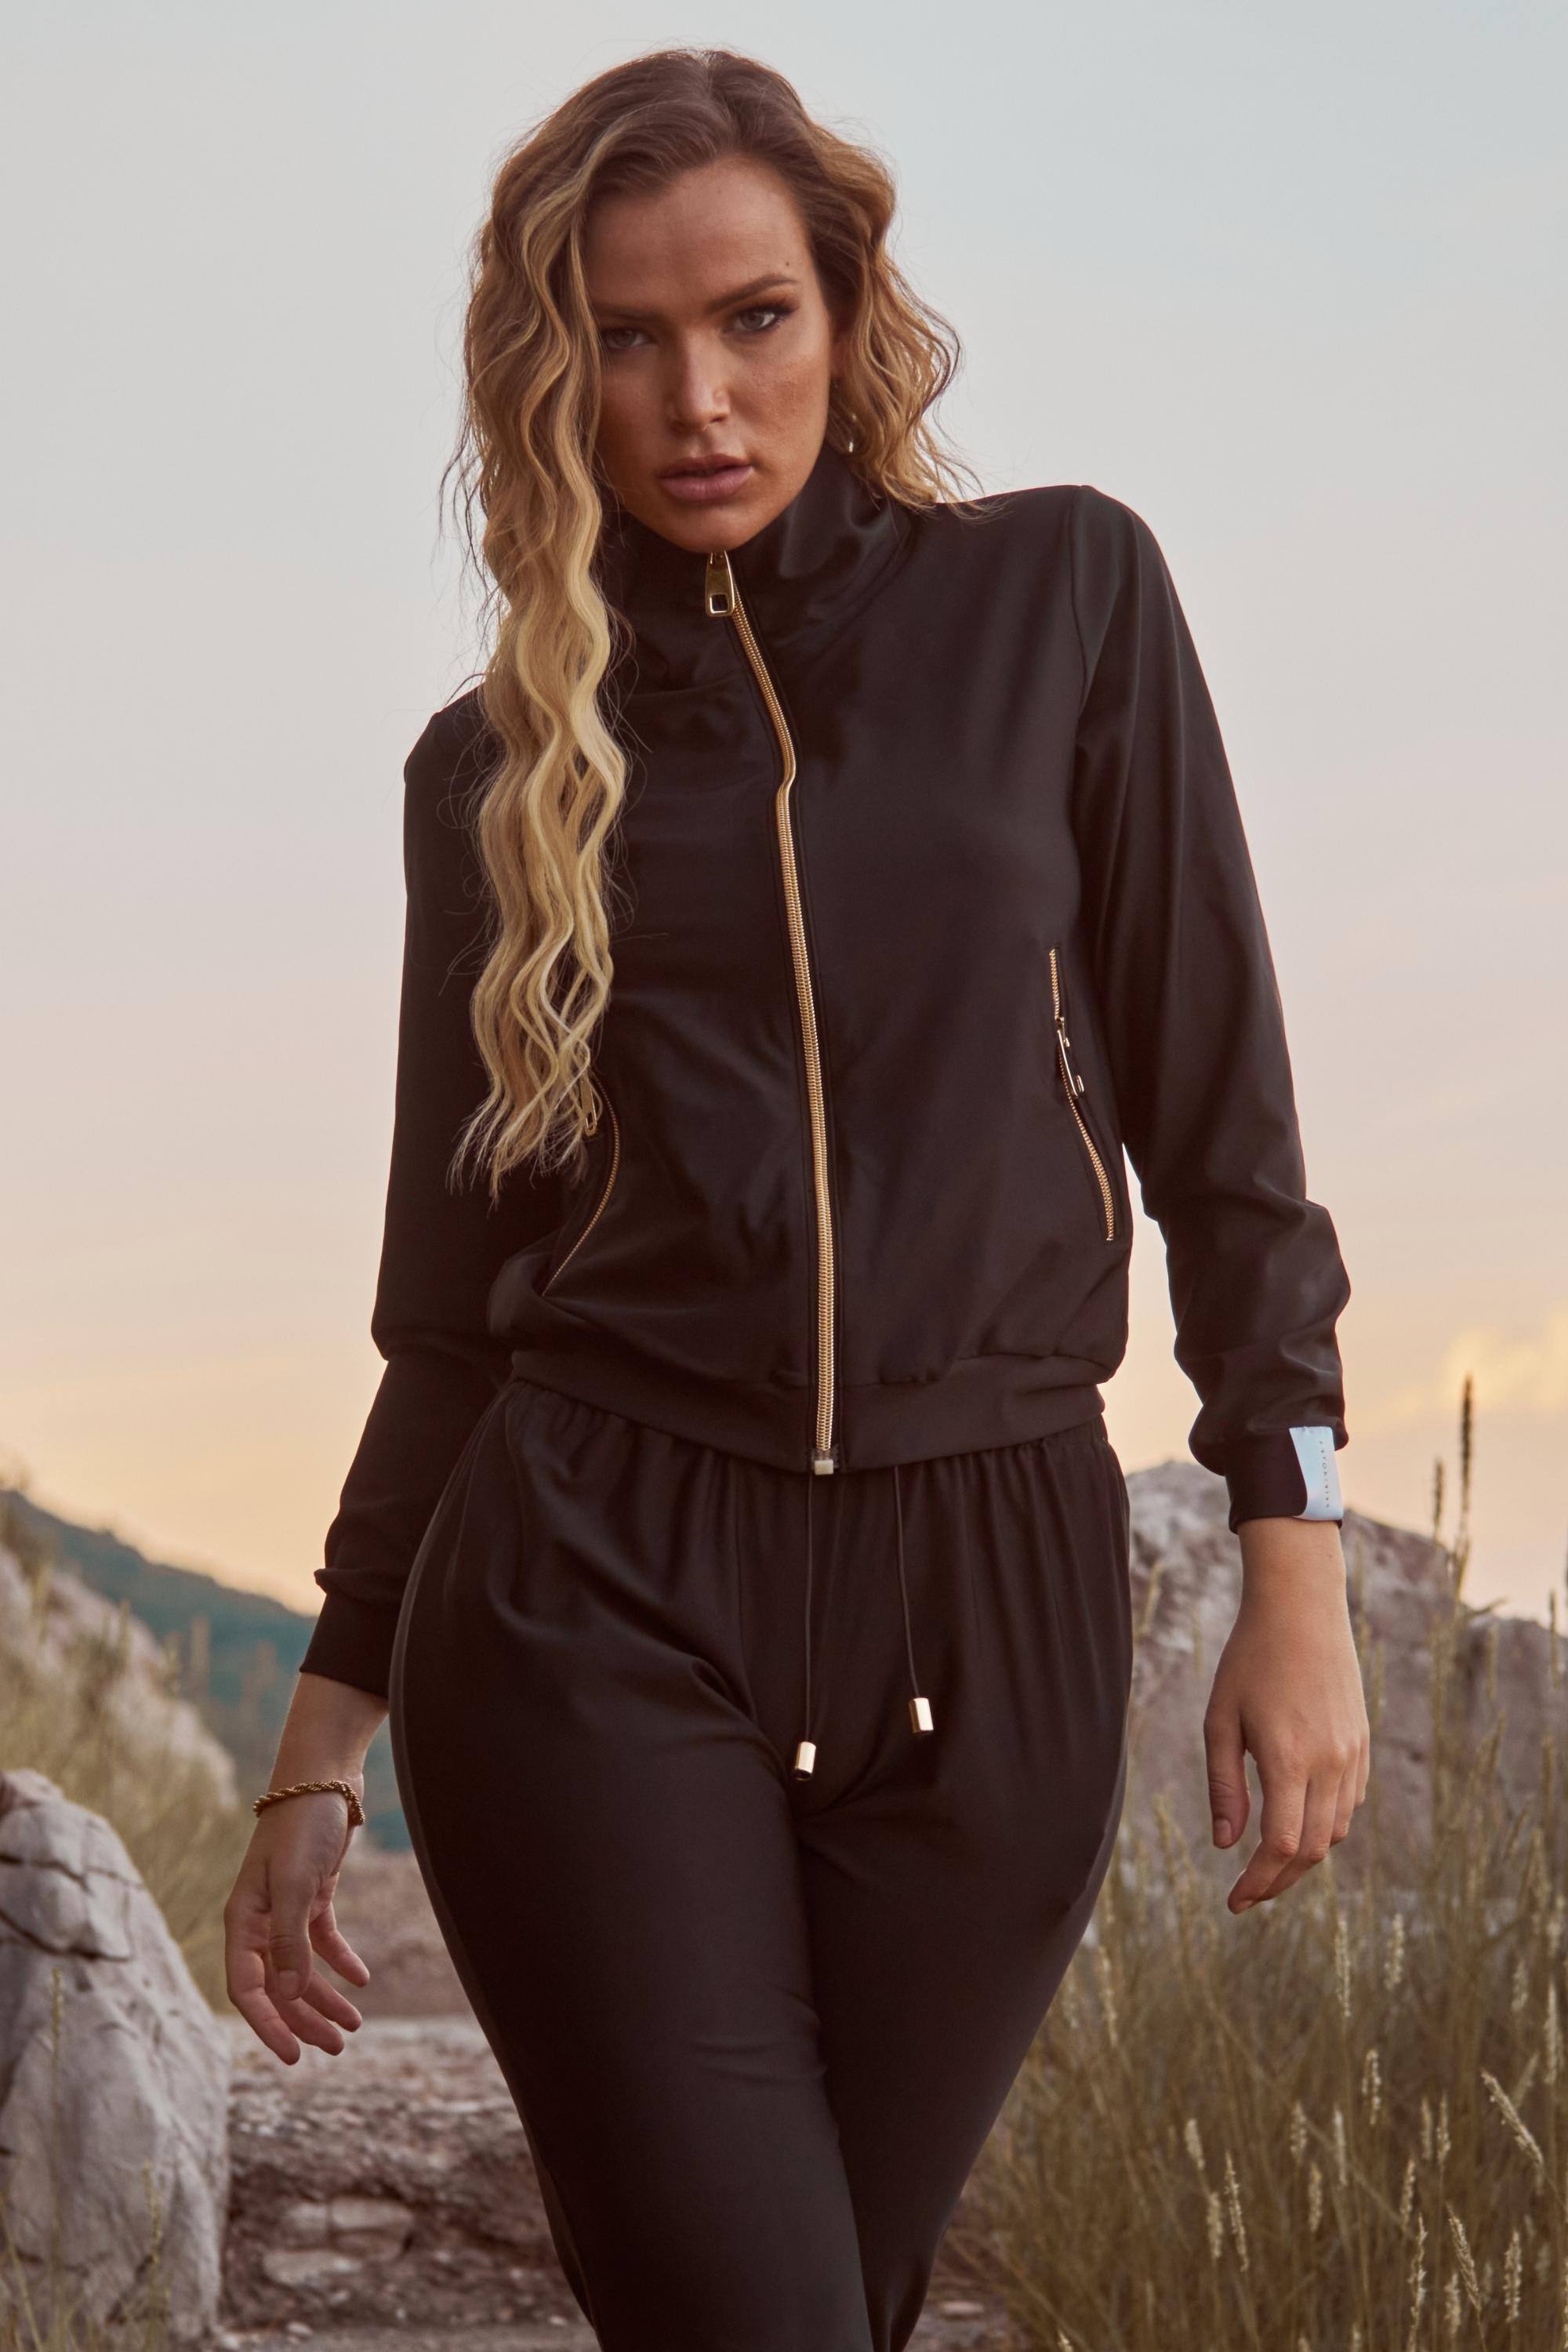 Buy Black Tracksuits for Women by ALISBA Online